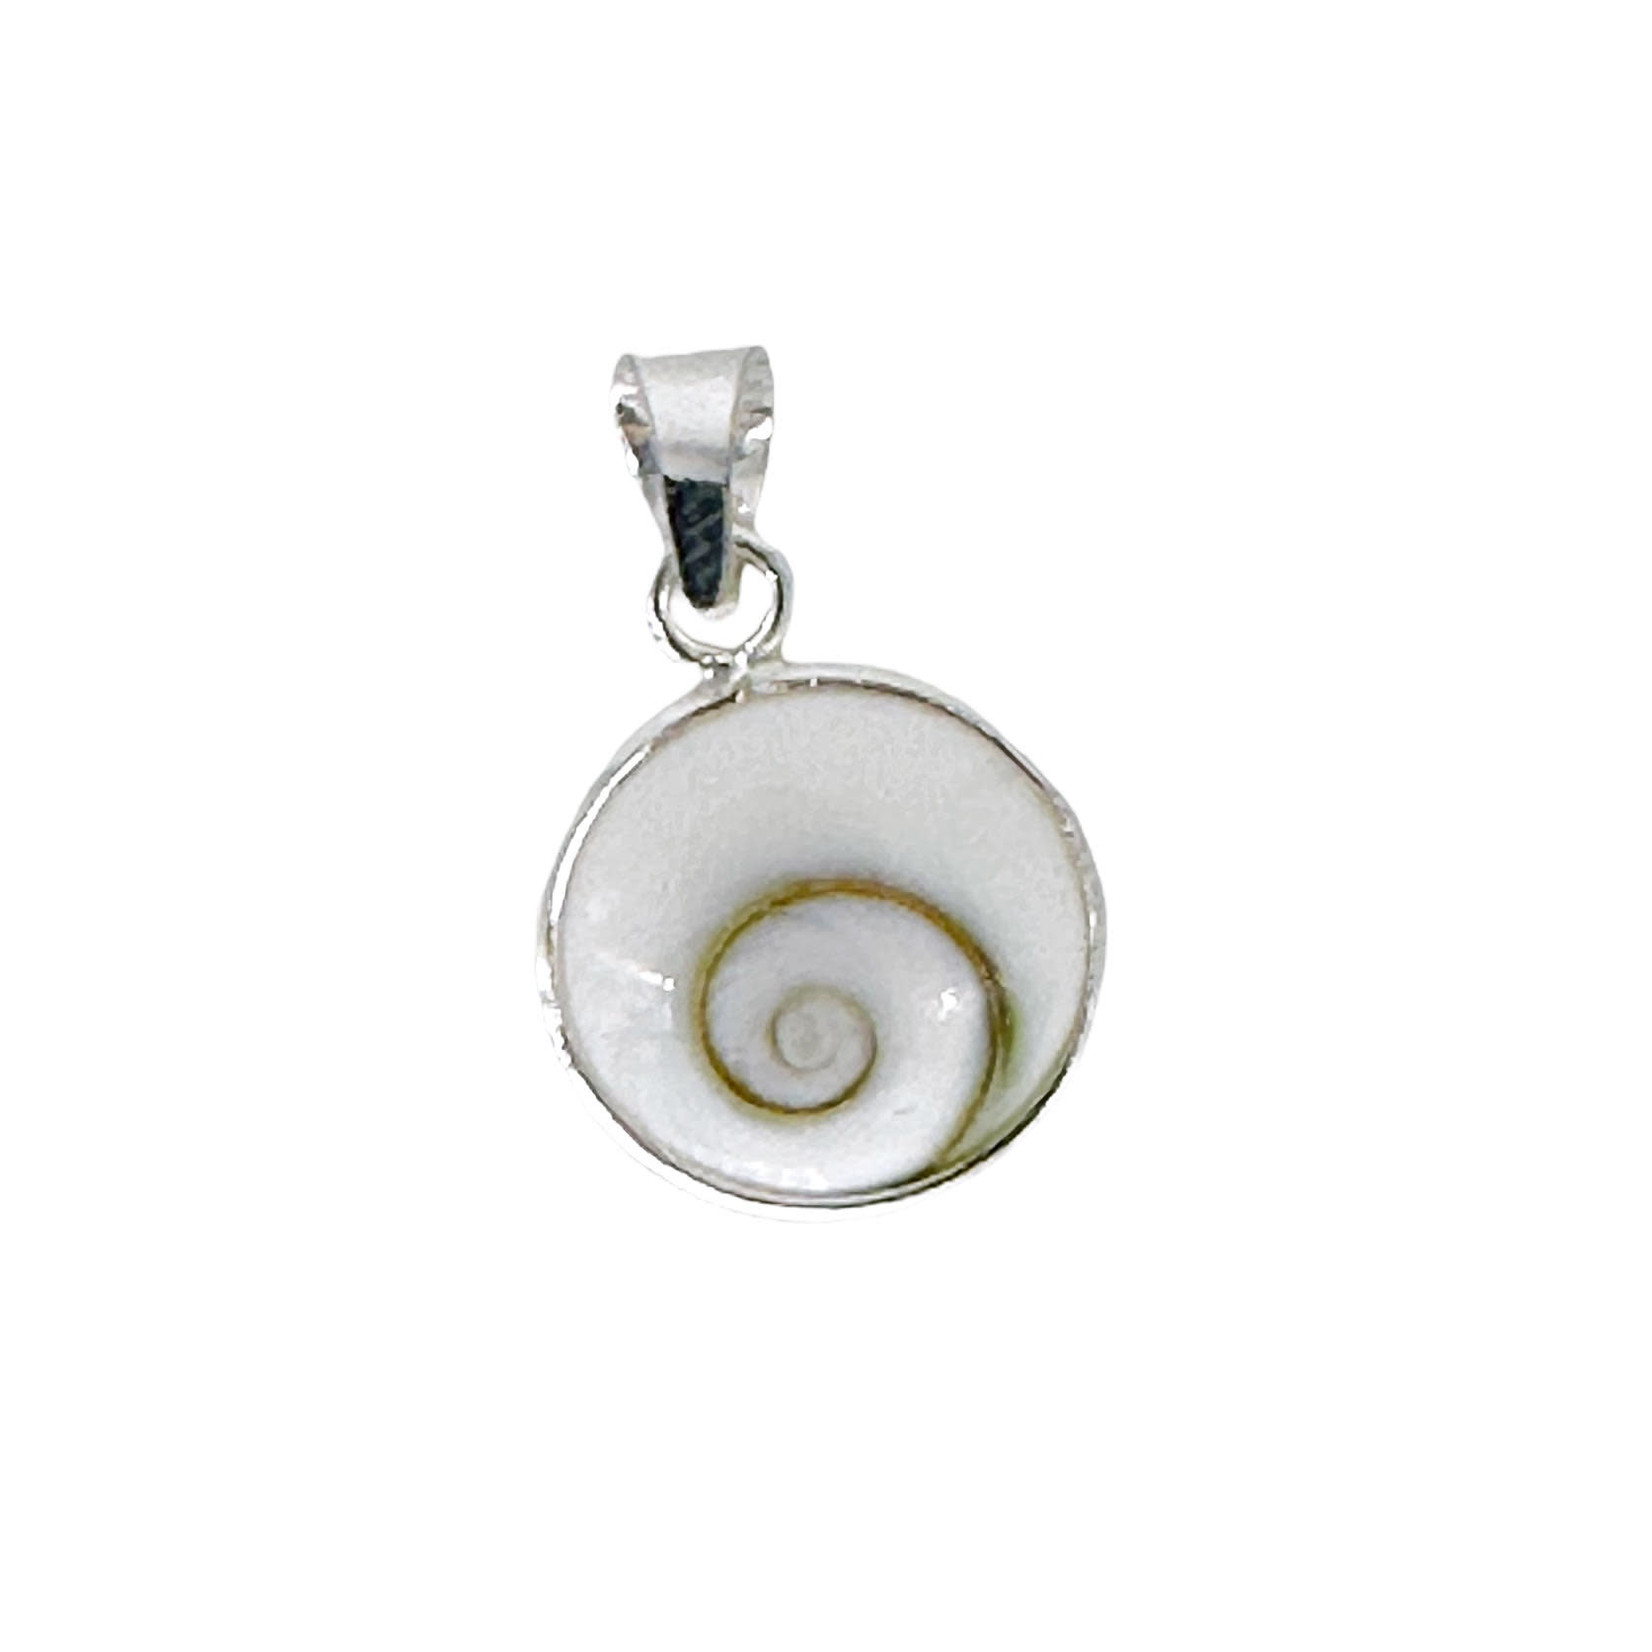 P170 Sterling Silver Eye of Shiva Round Pendant Large